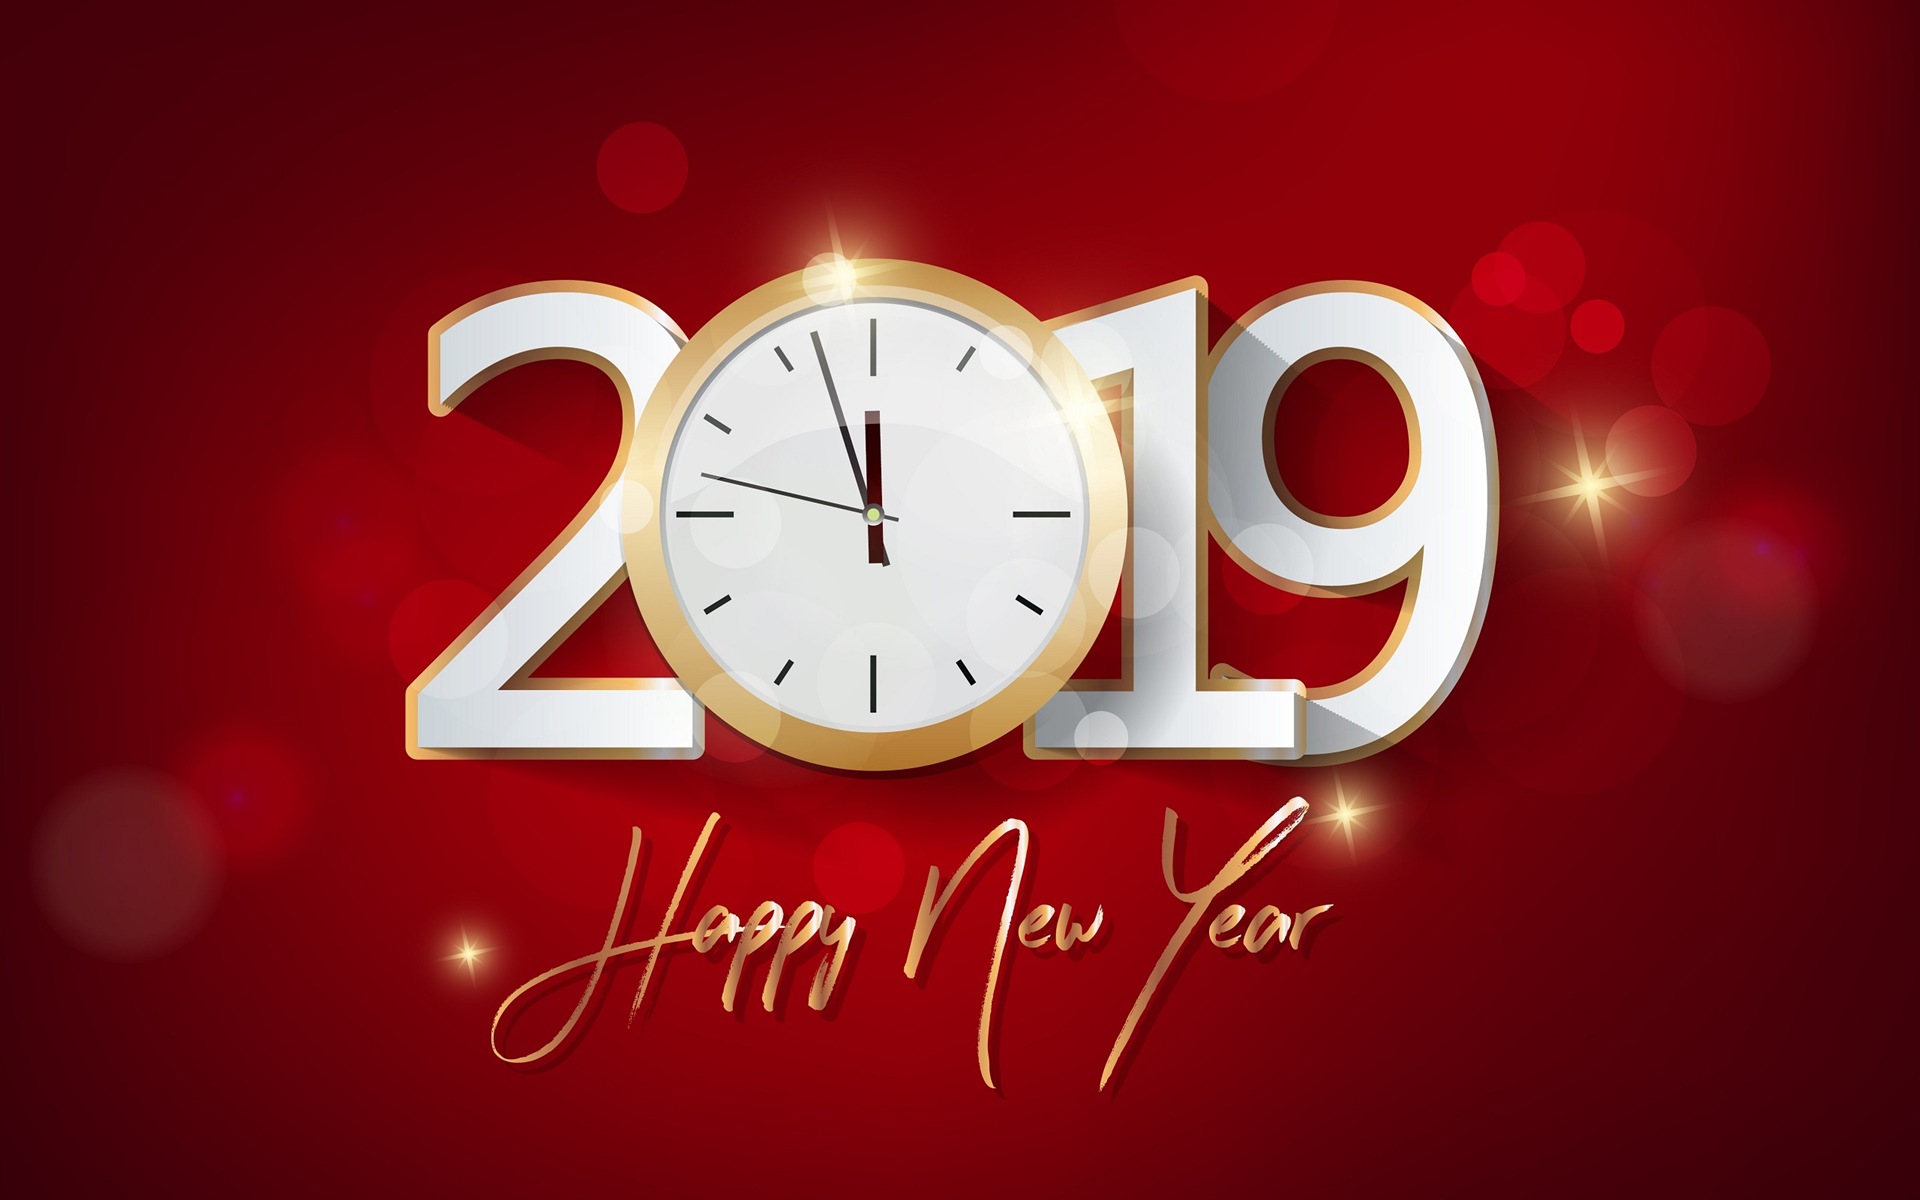 Happy New Year 2019 HD wallpapers #8 - 1920x1200